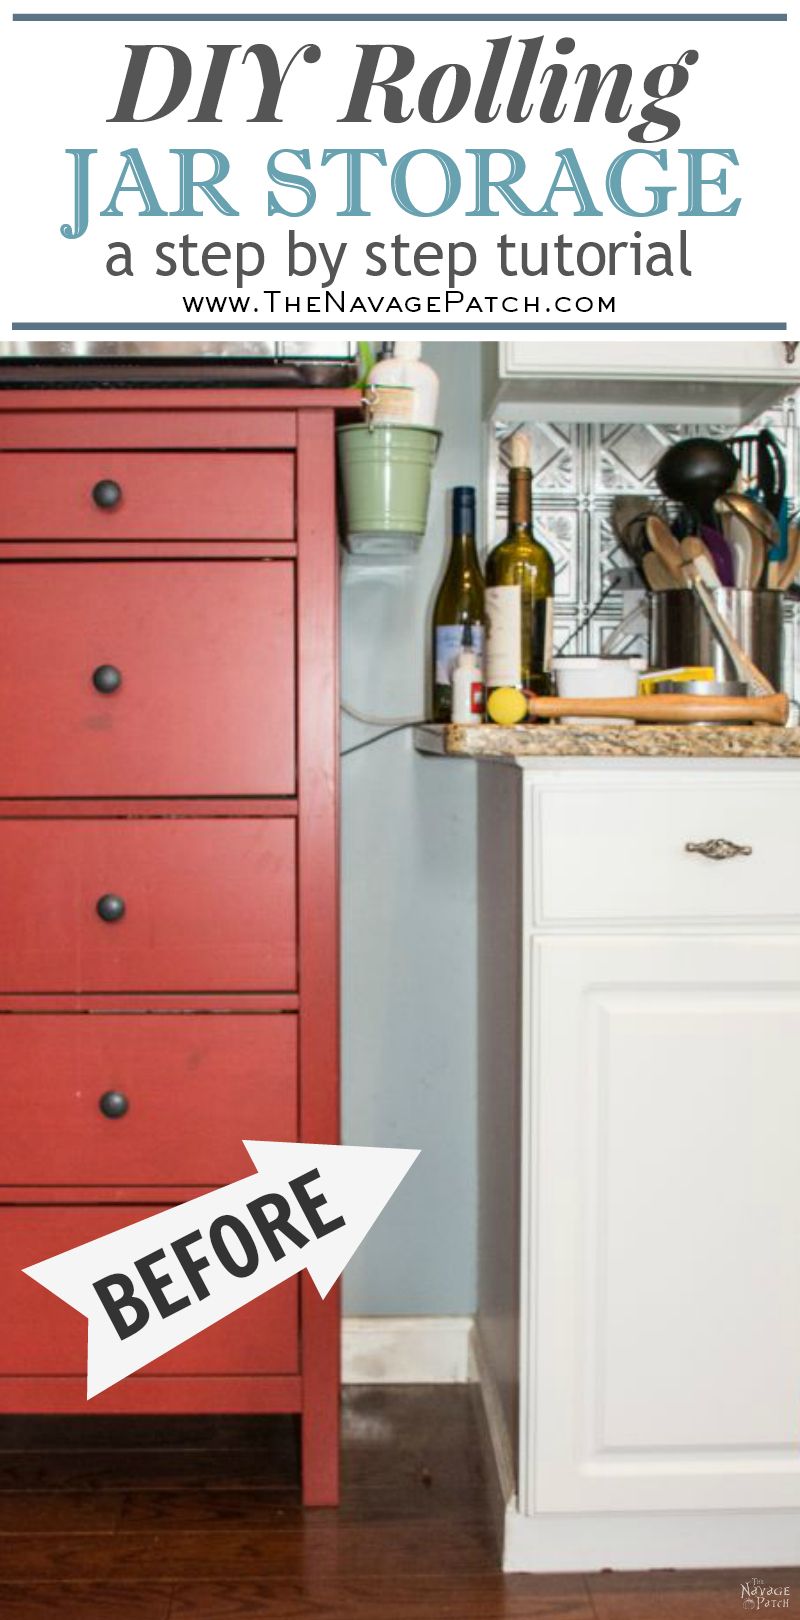 DIY Rolling Storage | DIY pull-out kitchen shelves | DIY storage shelves with casters | Step-by-step cabinetry tutorial | DIY kitchen organization and small space organization | #TheNavagePatch #organization #diy #Kitchenshelves #Woodworking #diyfurniture #cart #HowTo #Tutorial | TheNavagePatch.com